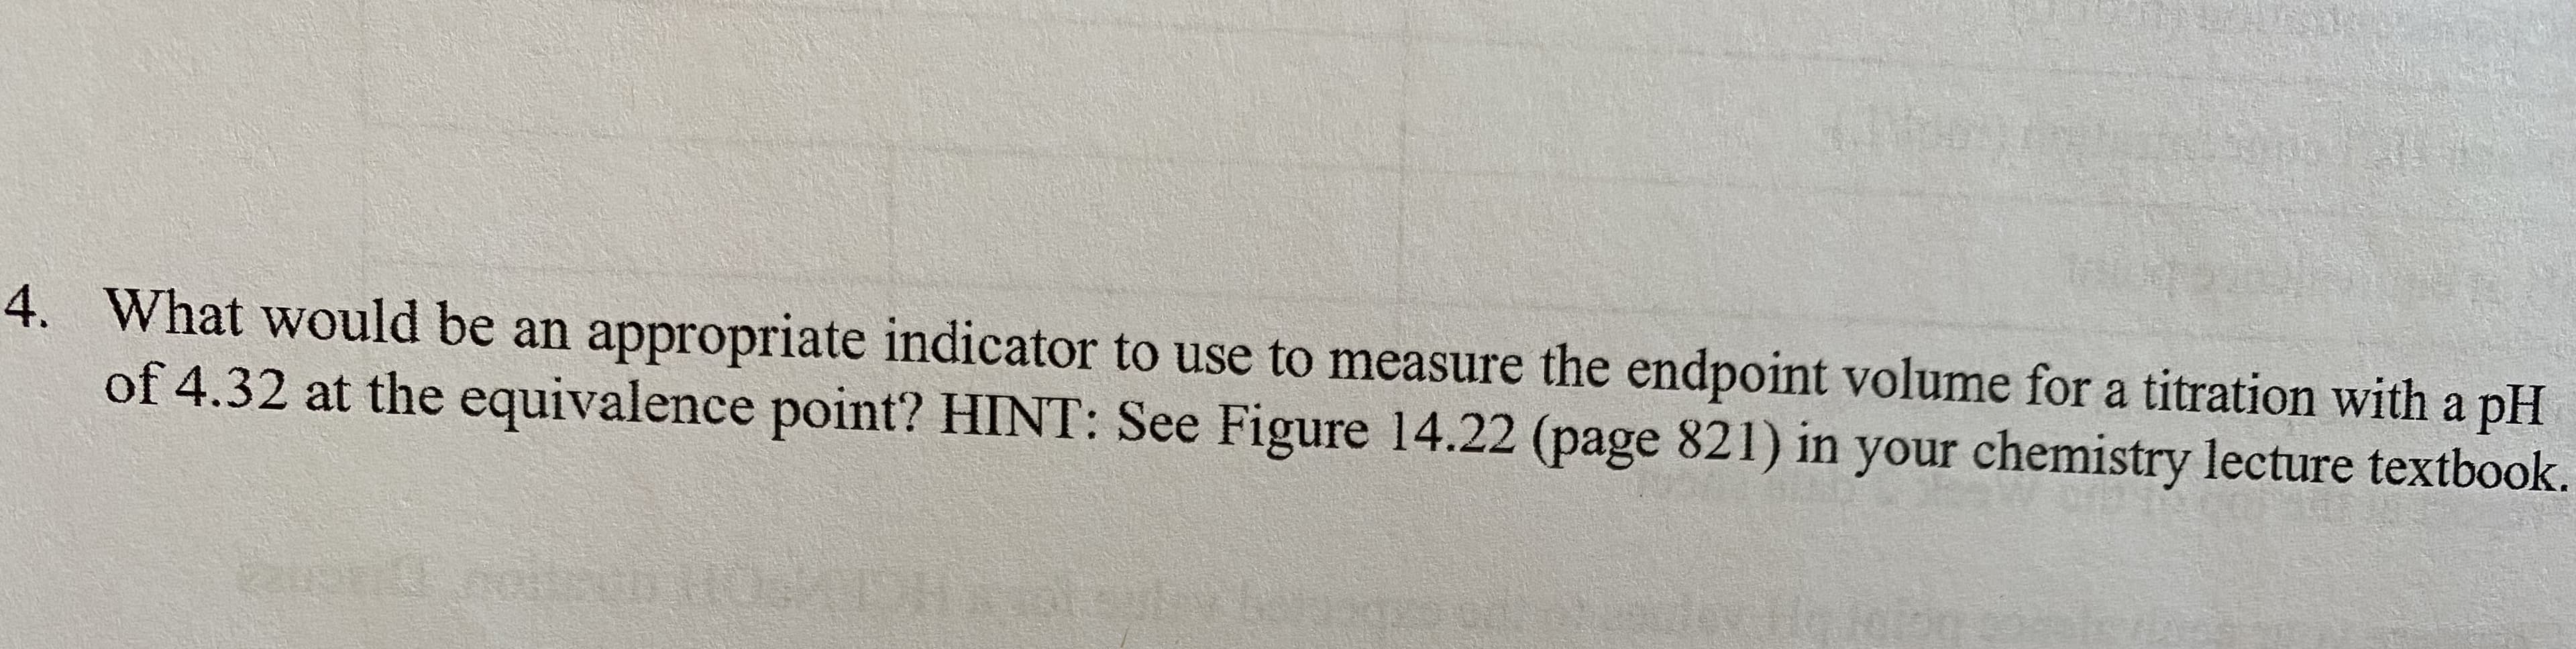 4. What would be an appropriate indicator to use to measure the endpoint volume for a titration with a pH
of 4.32 at the equivalence point? HINT: See Figure 14.22 (page 821) in your chemistry lecture textbook.
